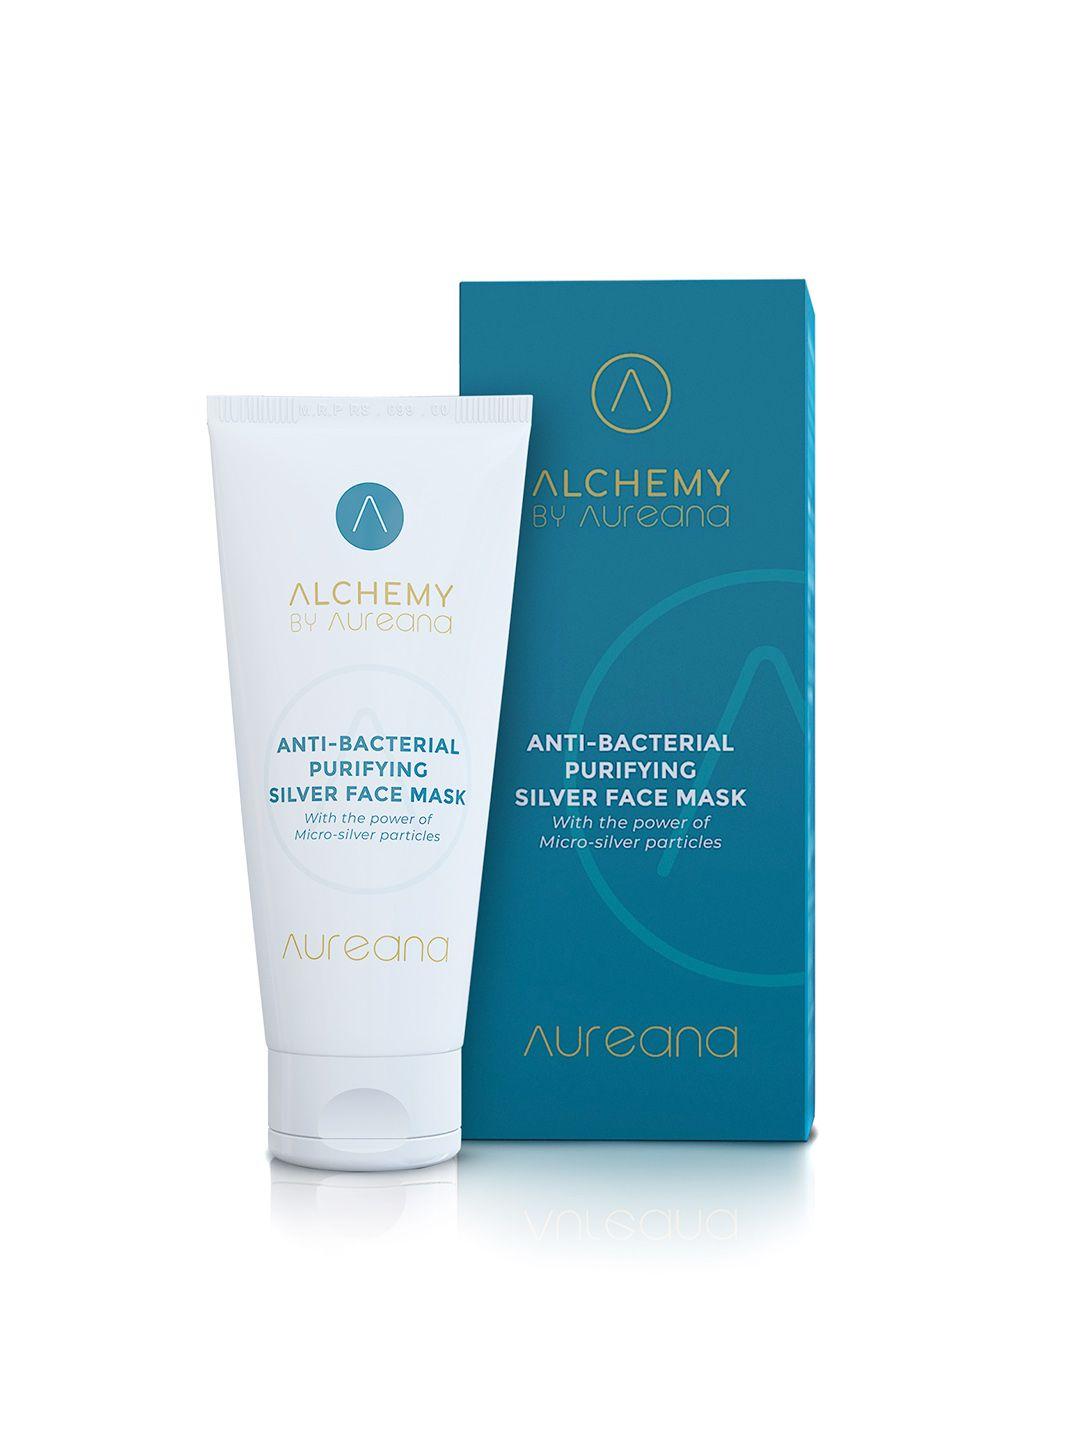 aureana alchemy anti-bacterial purifying silver face mask with micro-silver particle - 50g